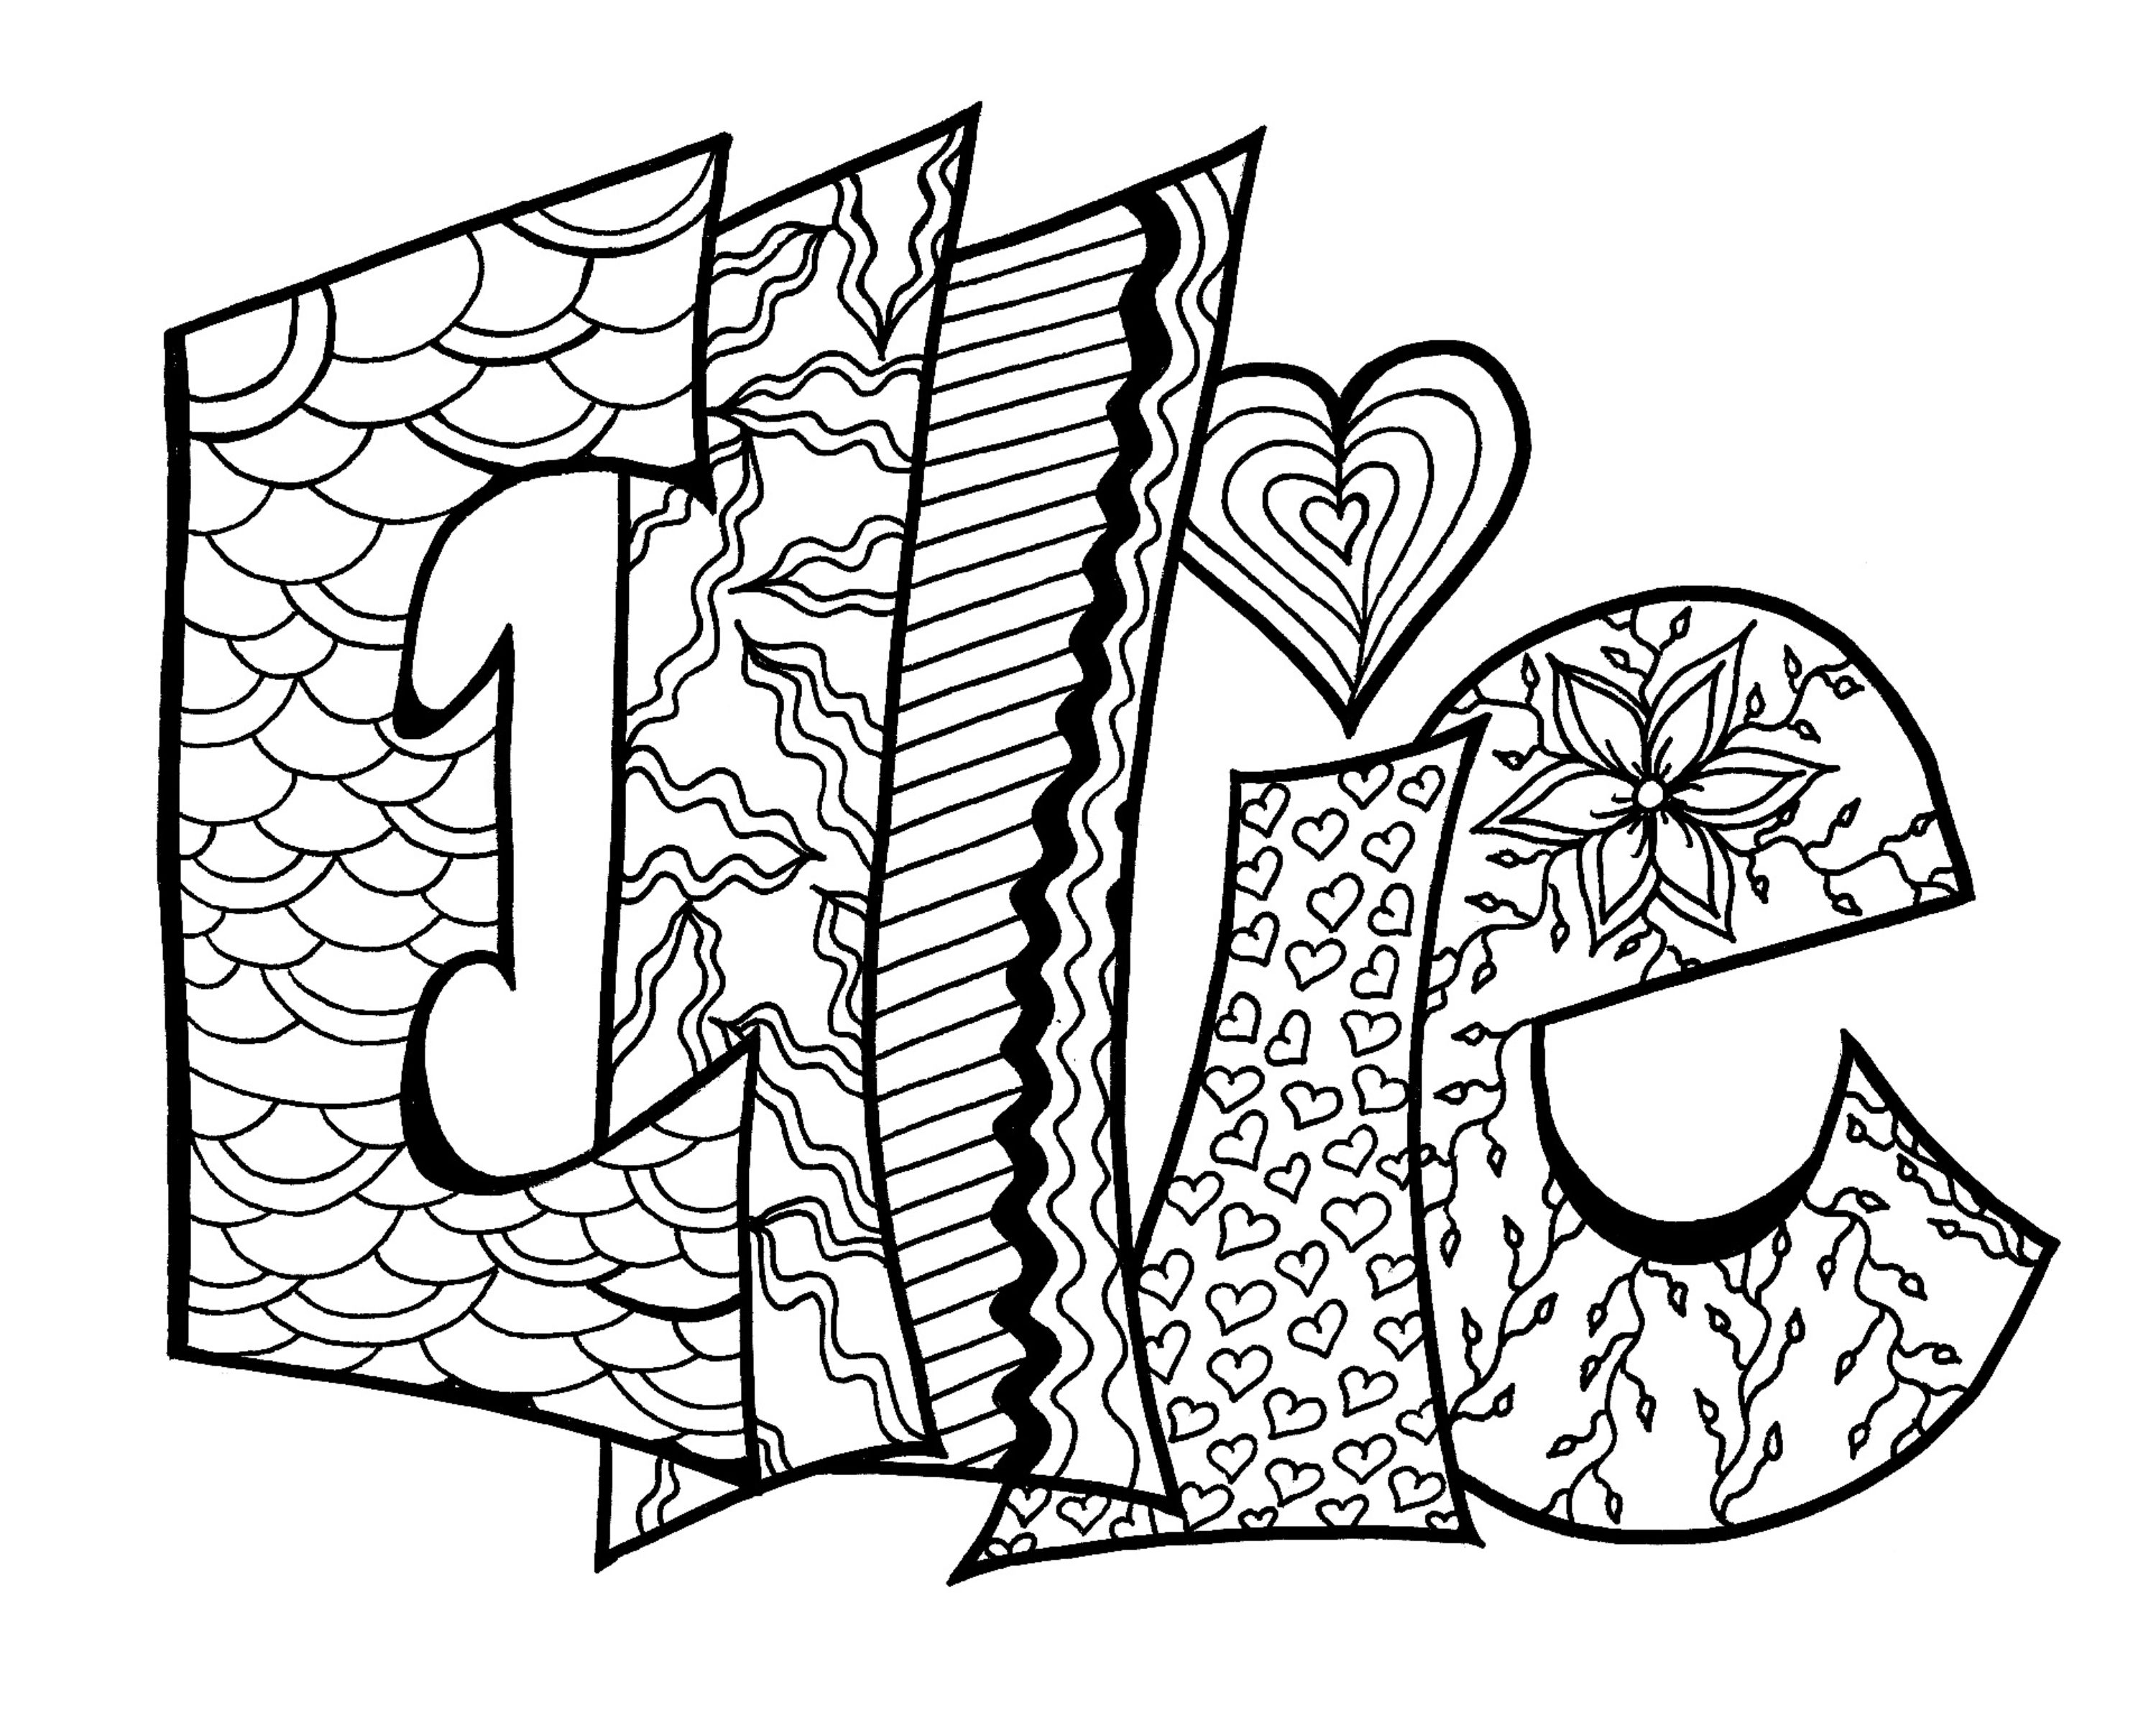 Personalized Name Coloring Pages at GetDrawings Free download